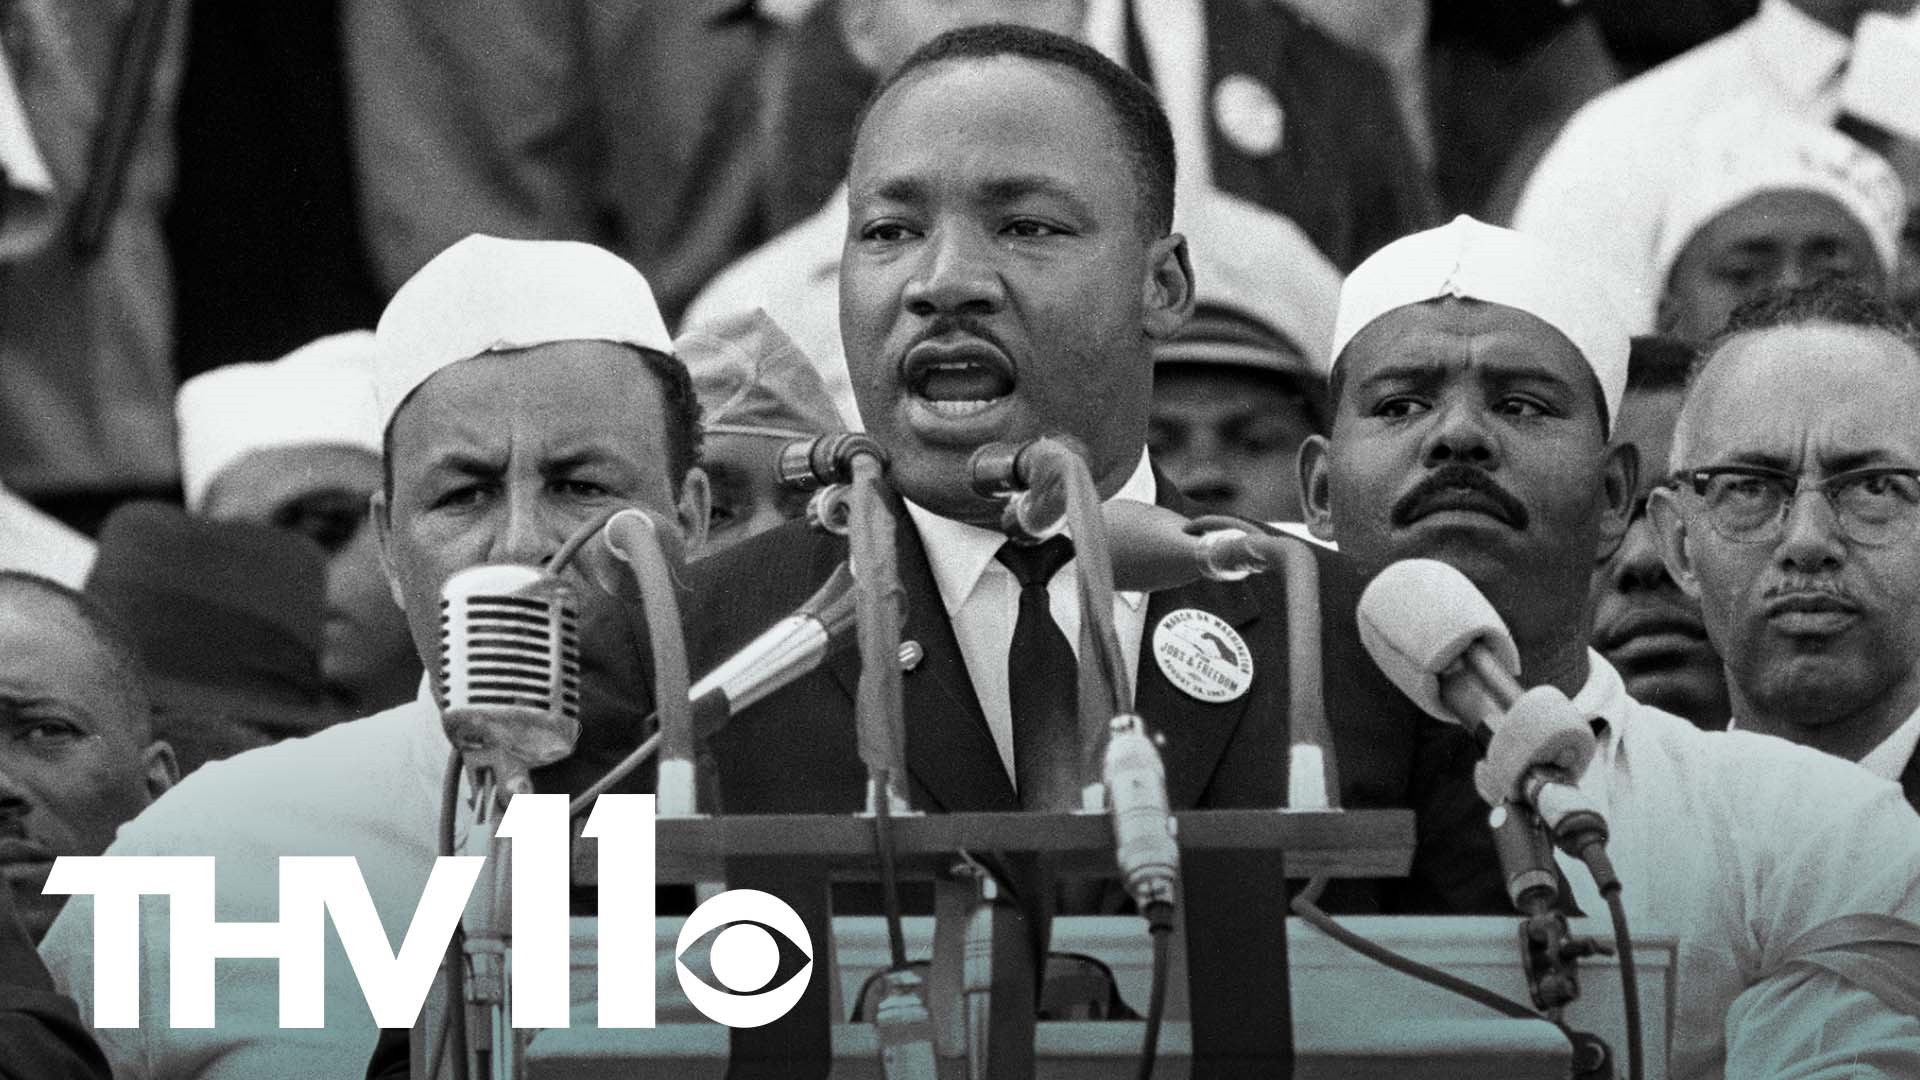 It's officially Martin Luther King Jr. Day and community leaders in Arkansas are ensuring his legacy continues more than 50 years after his death.